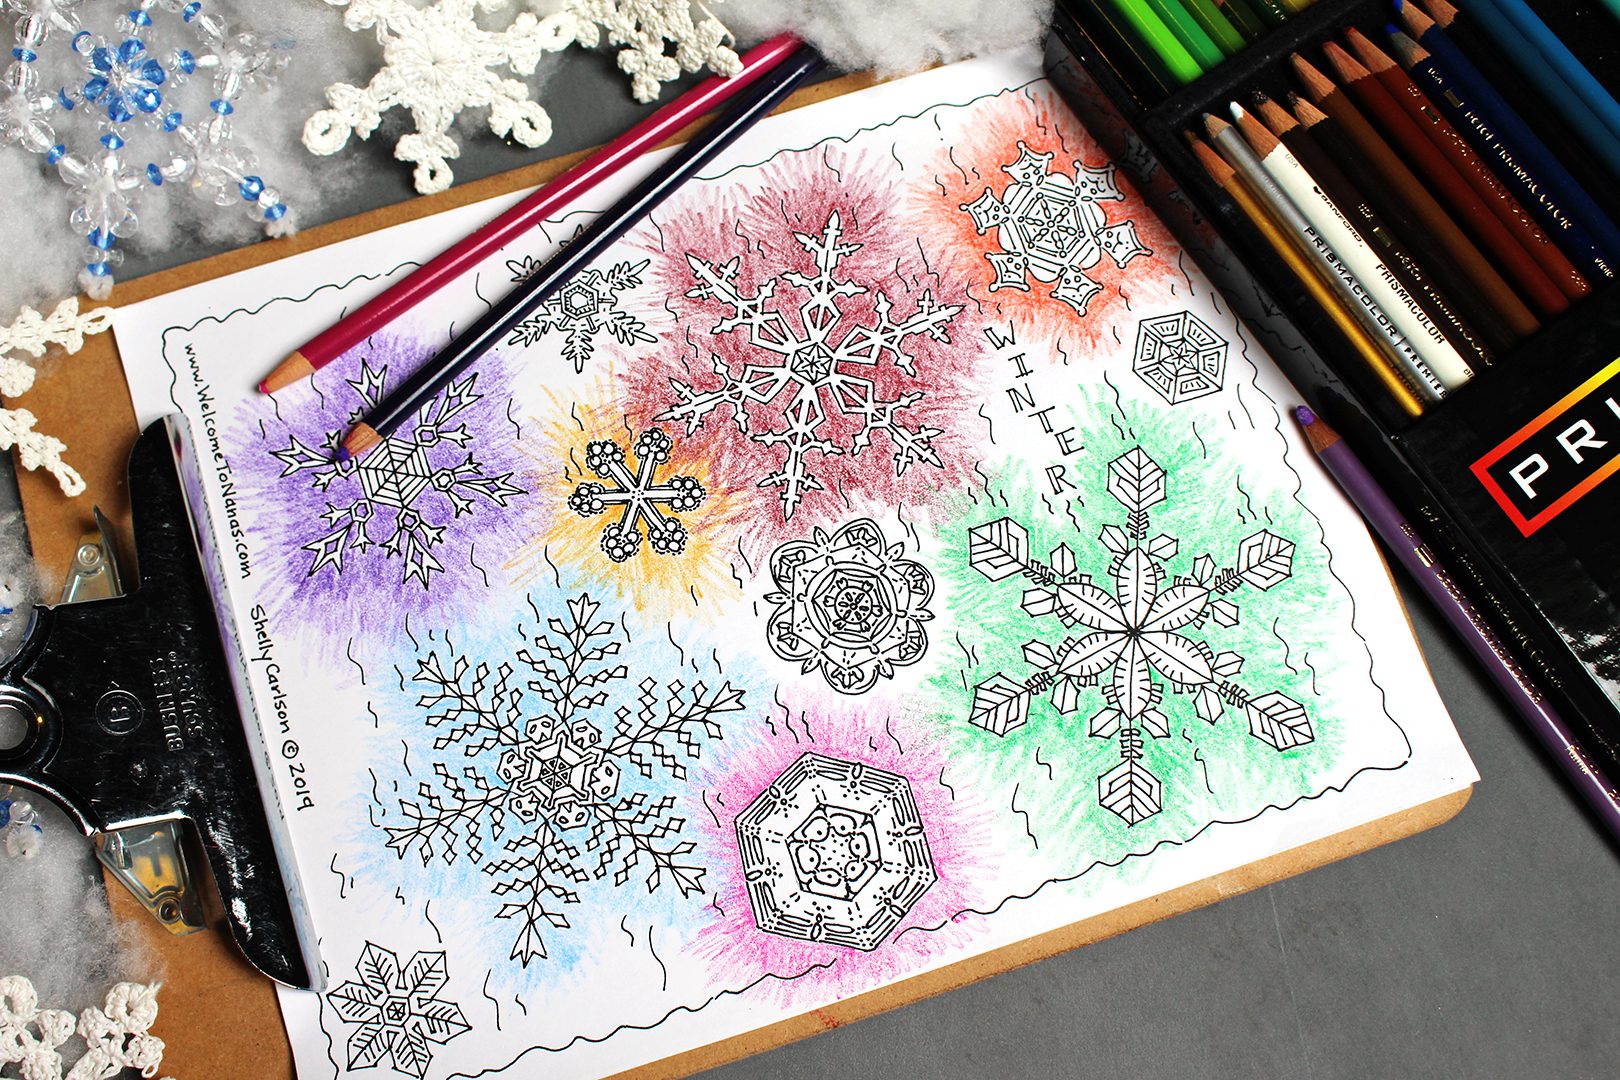 Coloring red, orange, green, and purple snowflakes with a purple colored pencil.